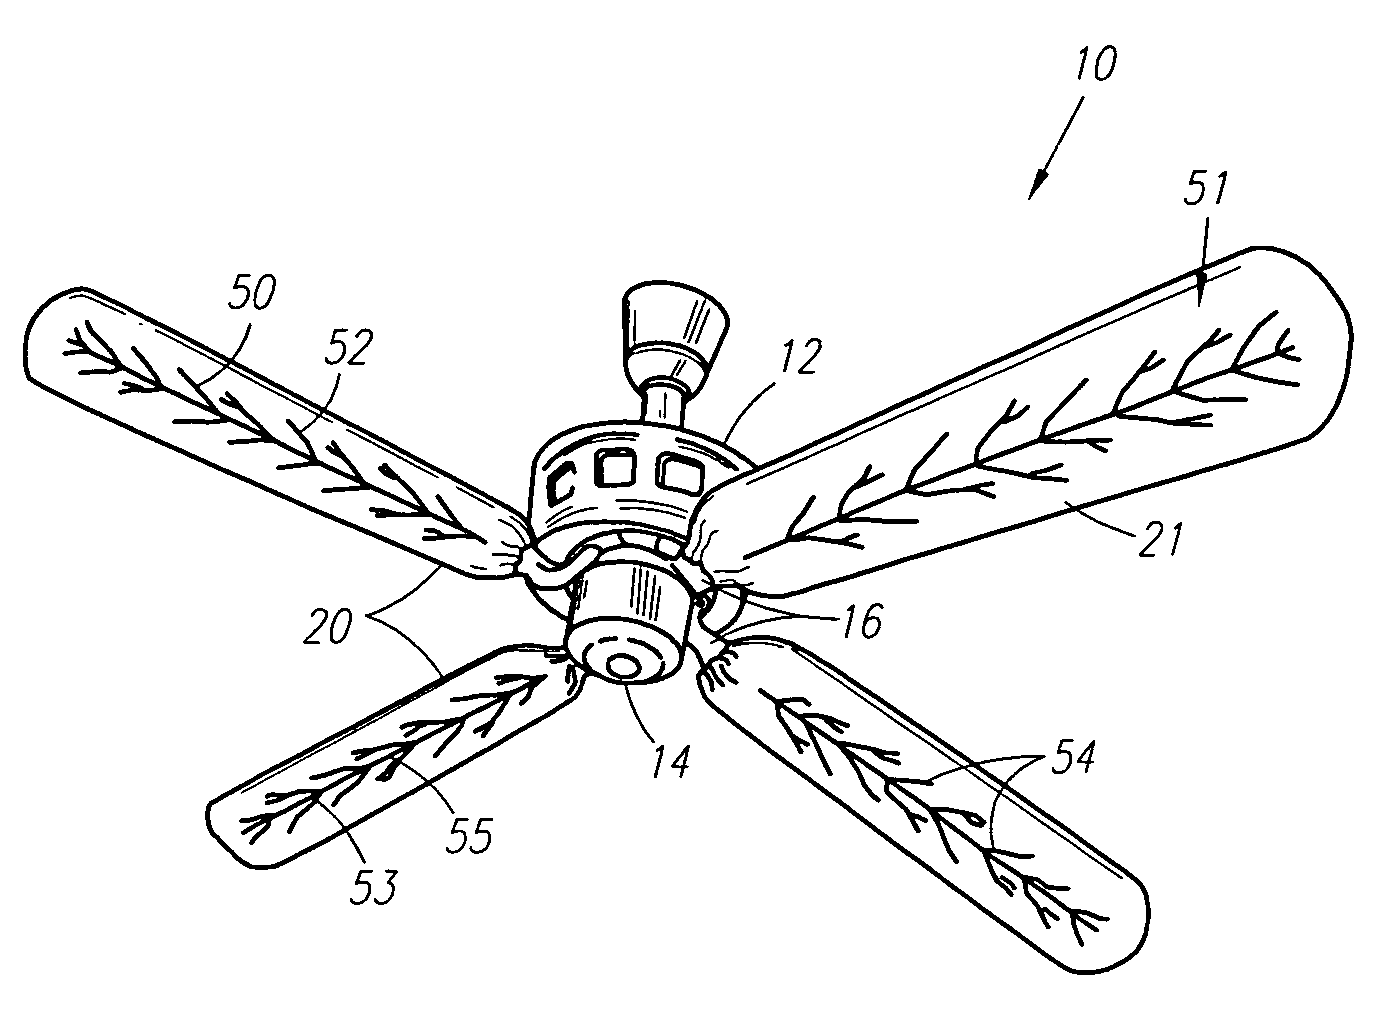 Kit for decorating ceiling fan blades